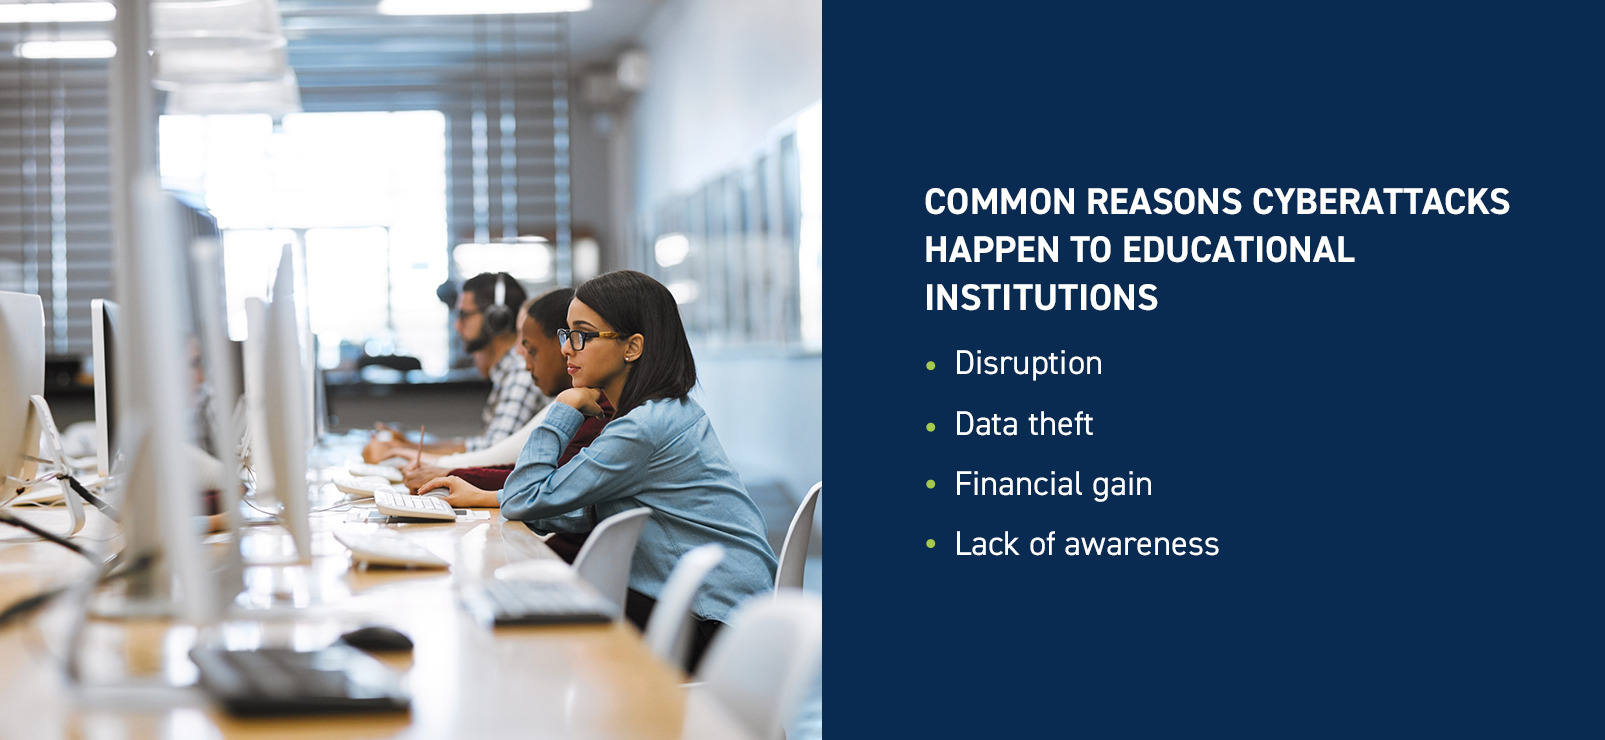 Common Reasons Cyberattacks Happen to Educational Institutions